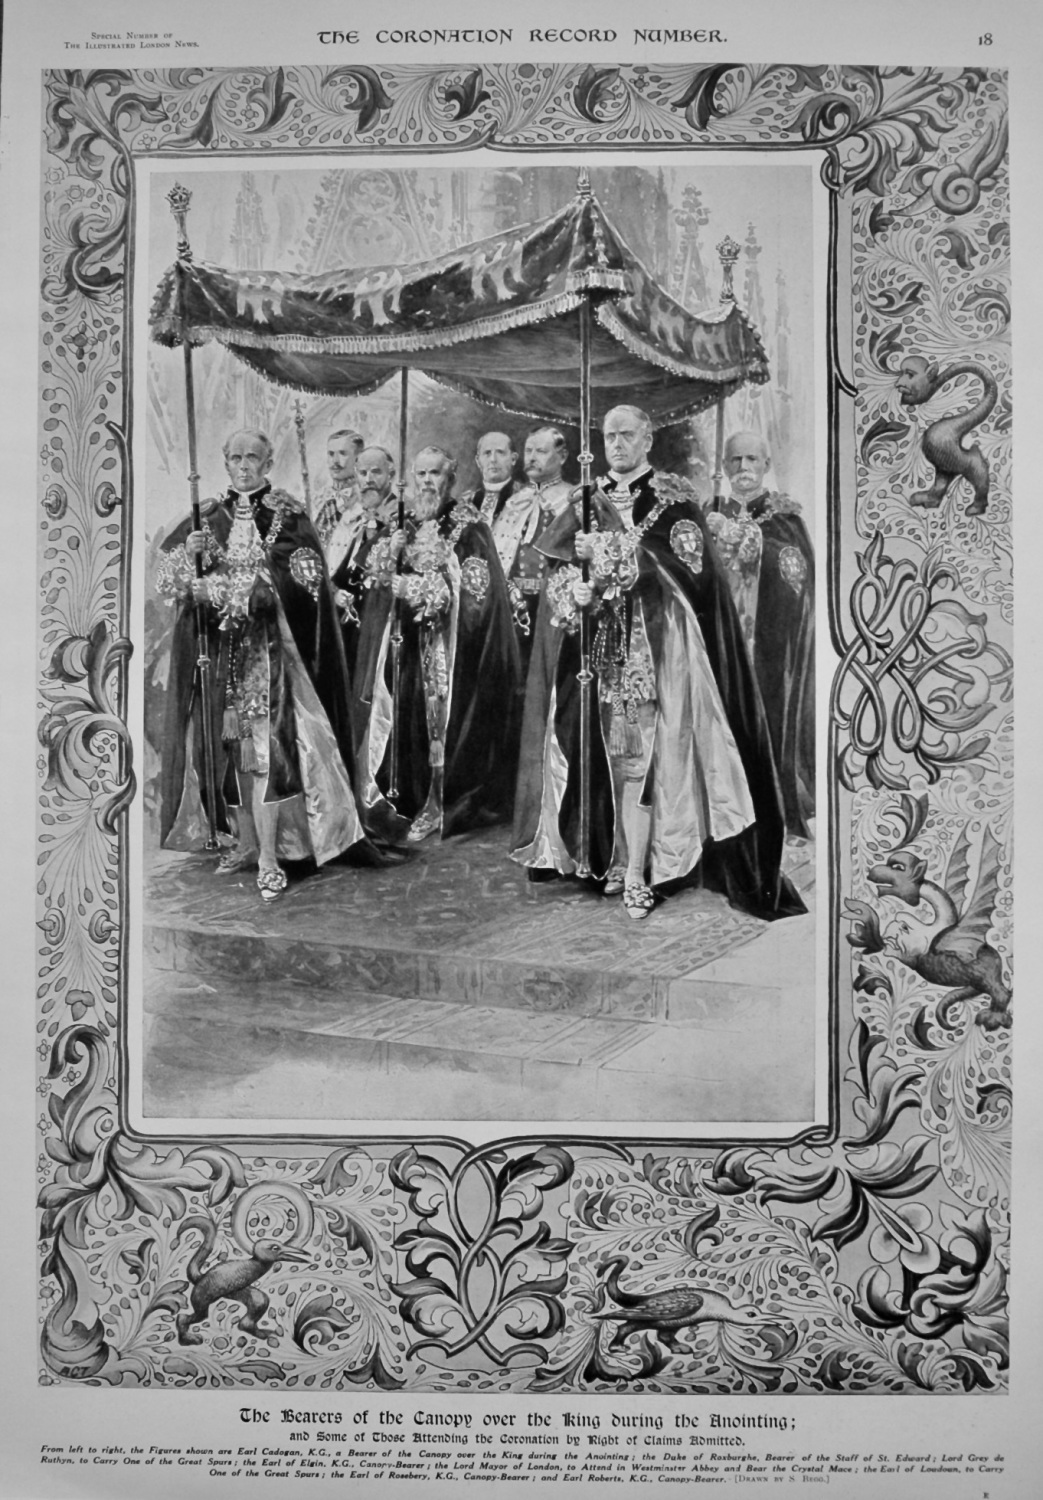 The Bearers of the Canopy over the King during the Anointing.  (Coronation 